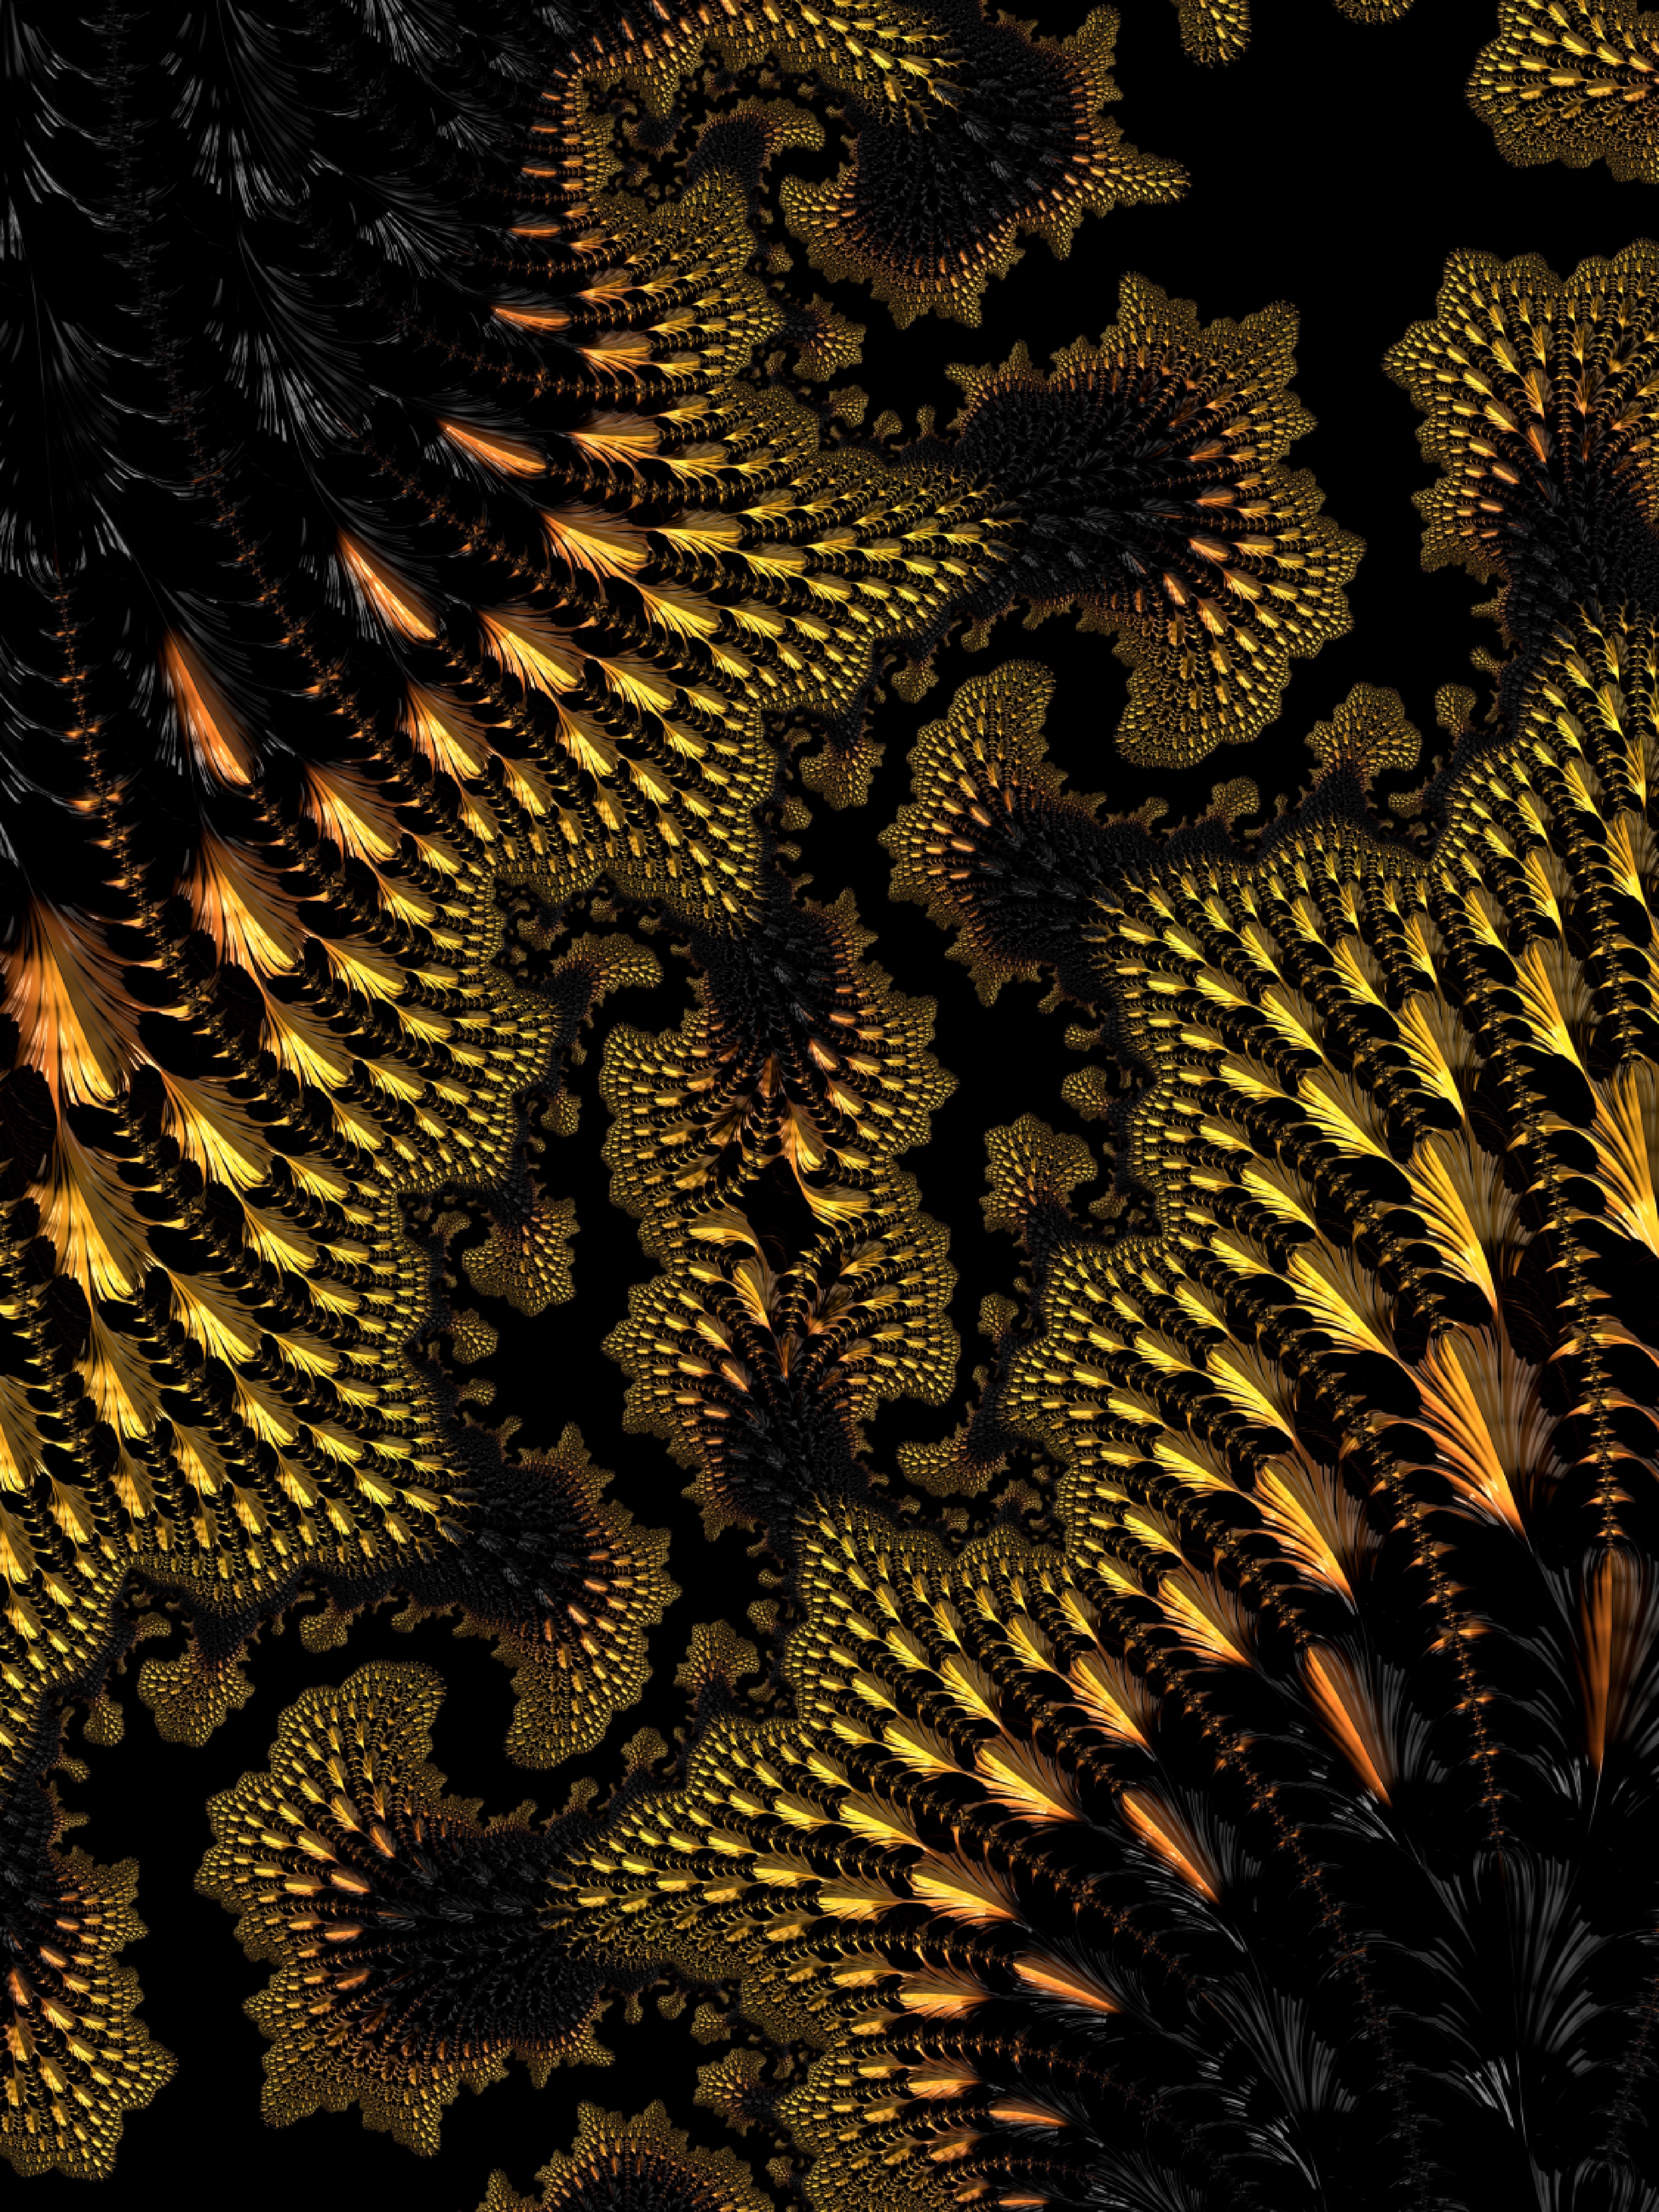 fractal, ornate, 3d, abstract, black, yellow, winding, sinuous Full HD